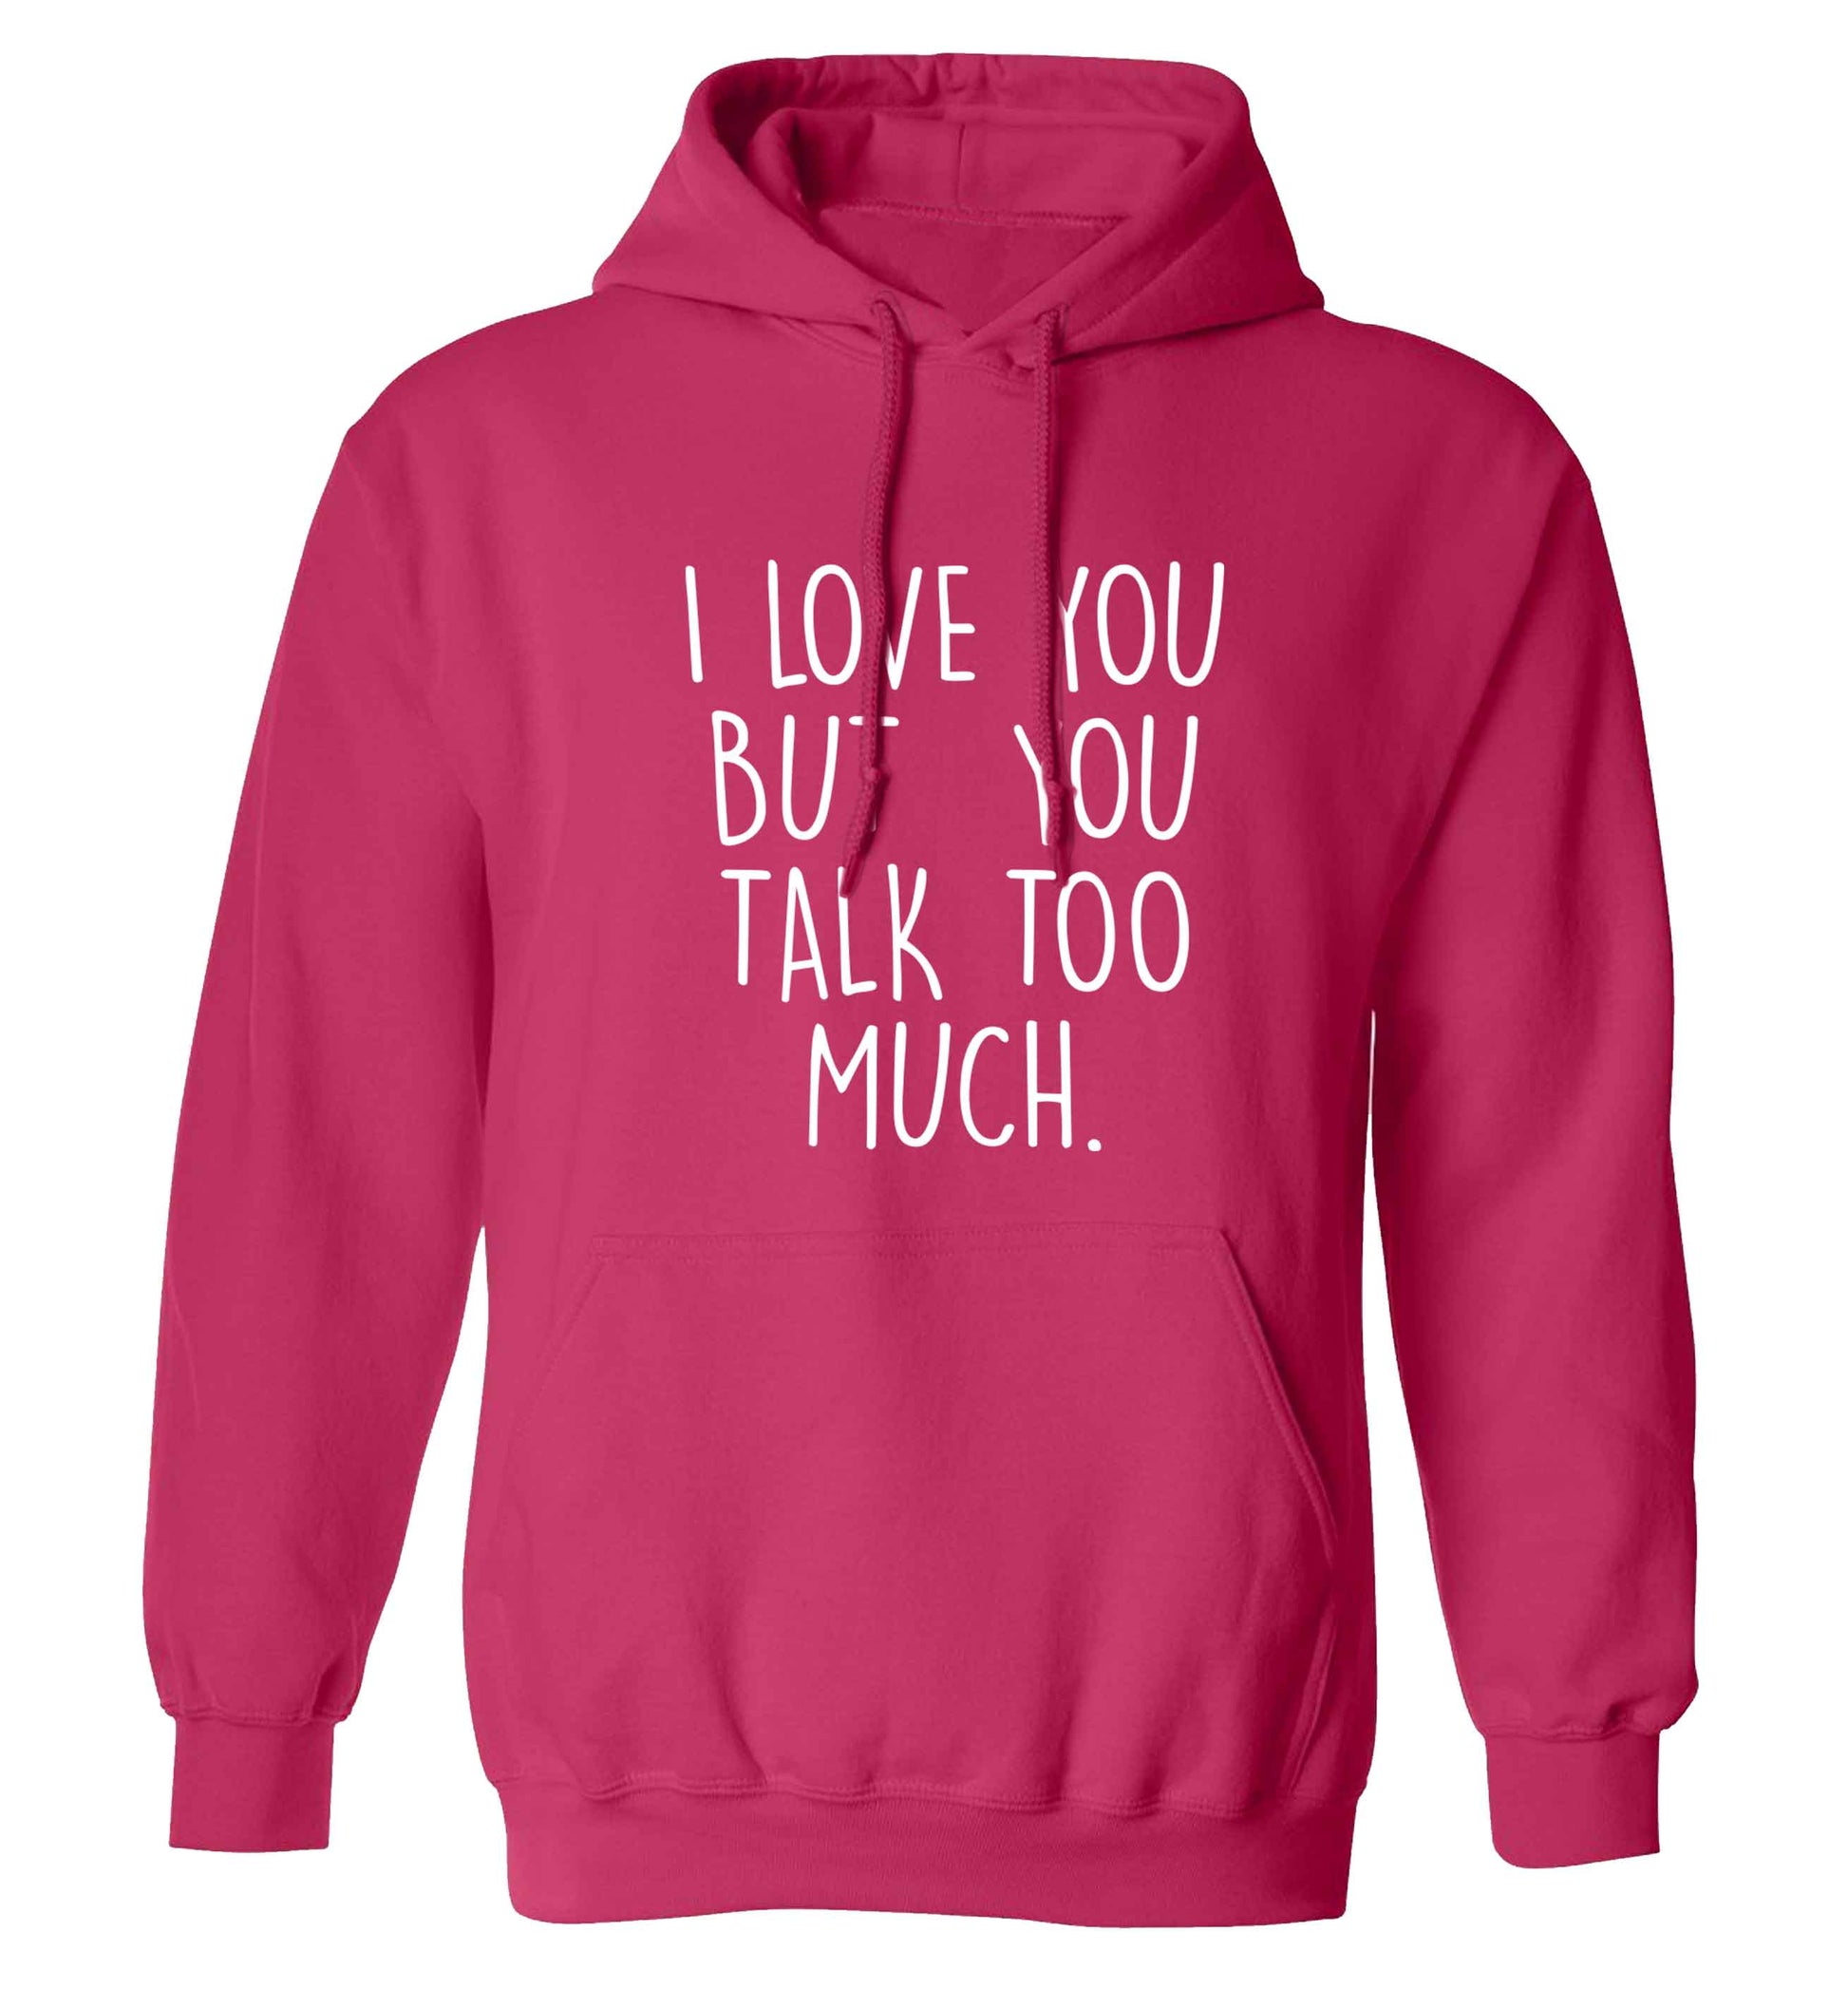 I love you but you talk too much adults unisex pink hoodie 2XL